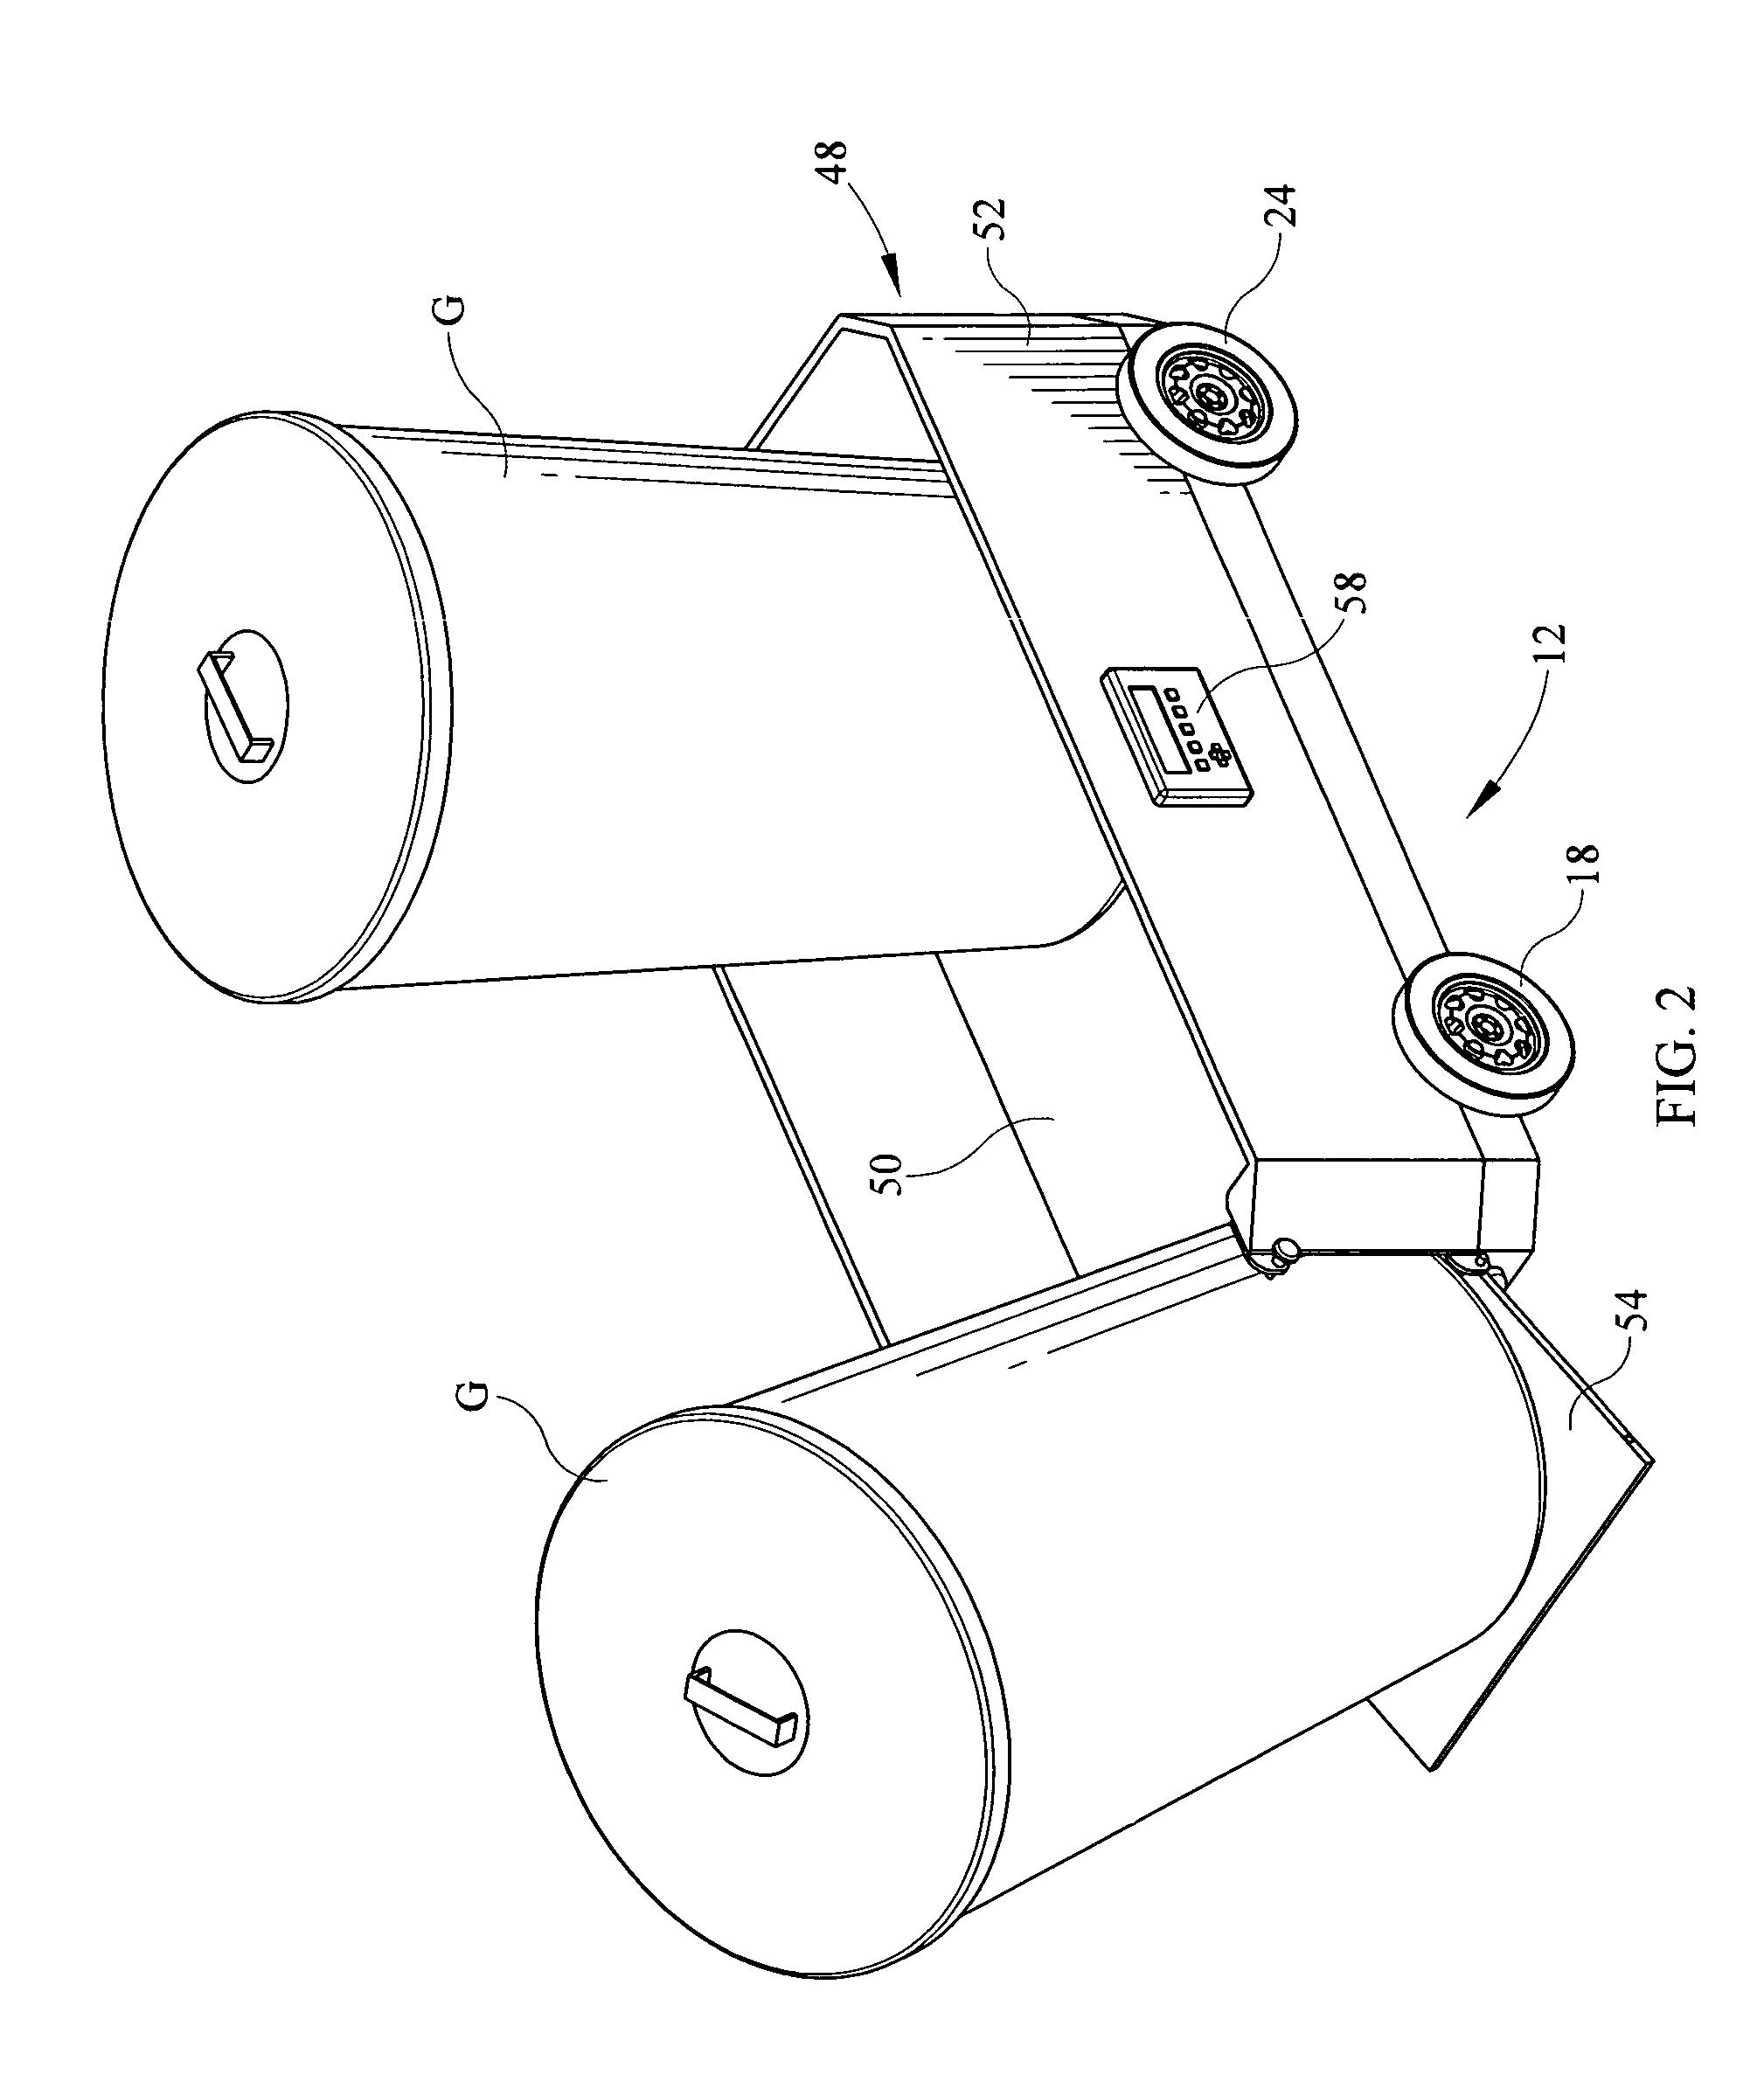 Automated garbage receptacle conveyance system